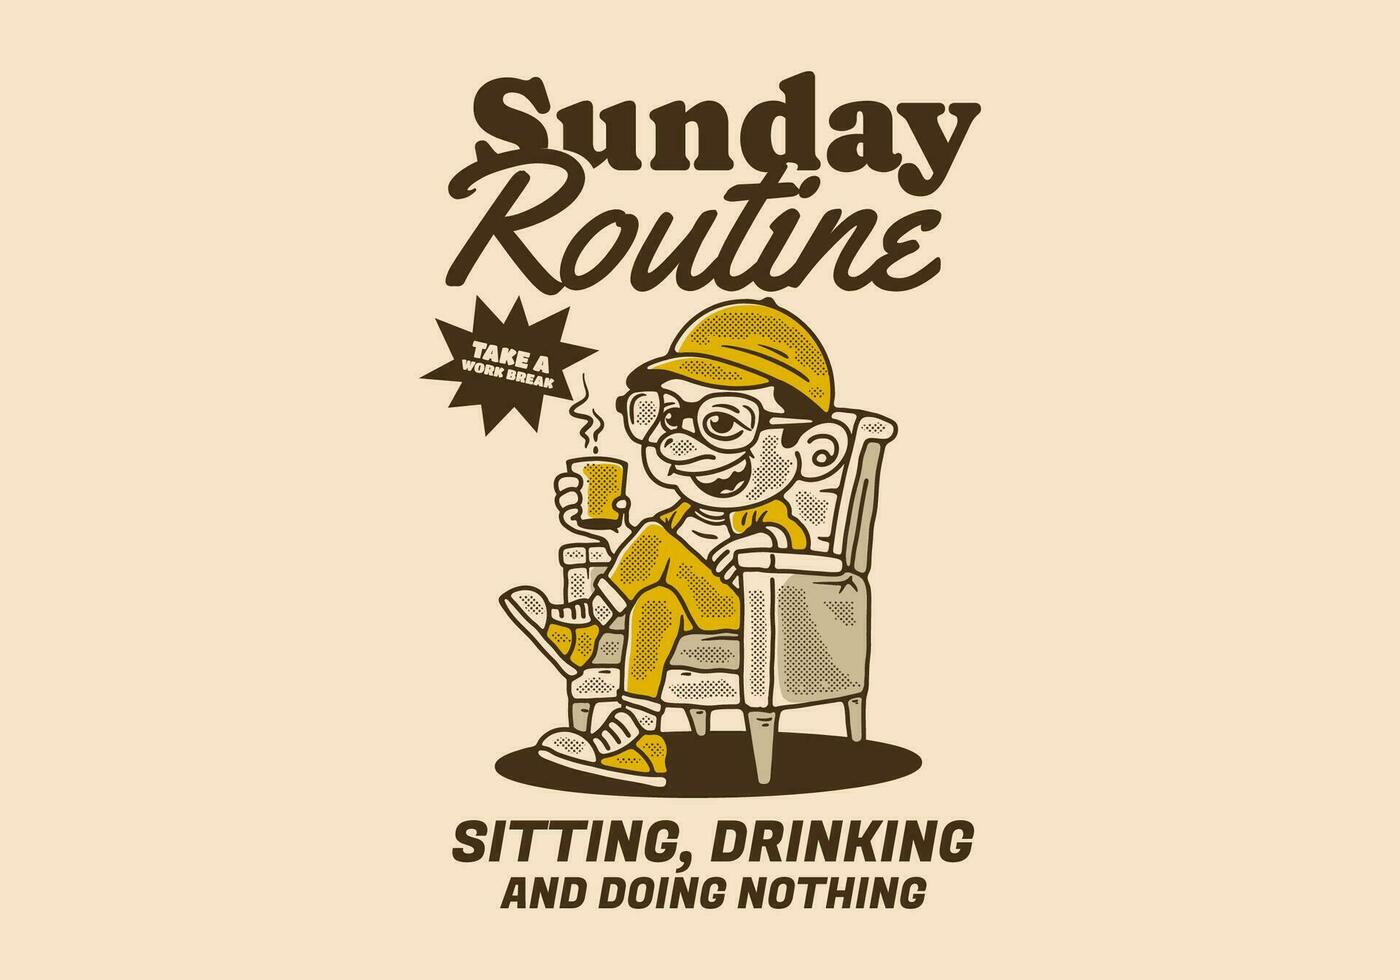 Sunday routine, sitting drinking and doing nothing, illustration of a man relaxing on a chair and holding a cup of coffee vector